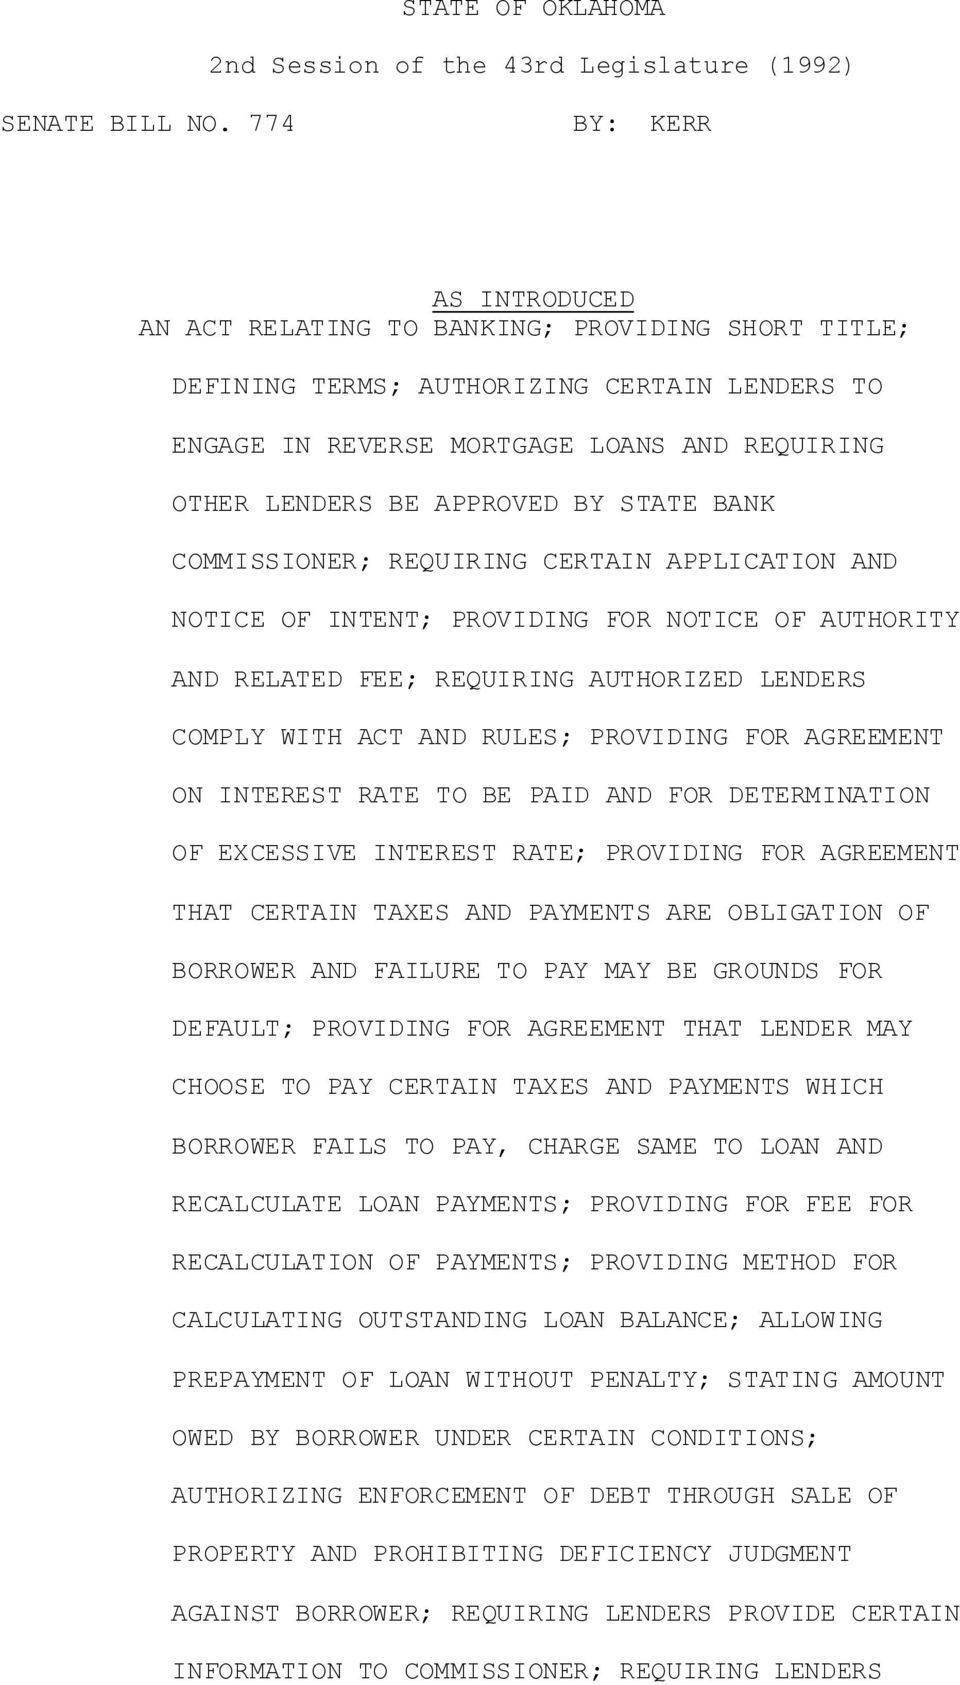 BY STATE BANK COMMISSIONER; REQUIRING CERTAIN APPLICATION AND NOTICE OF INTENT; PROVIDING FOR NOTICE OF AUTHORITY AND RELATED FEE; REQUIRING AUTHORIZED LENDERS COMPLY WITH ACT AND RULES; PROVIDING